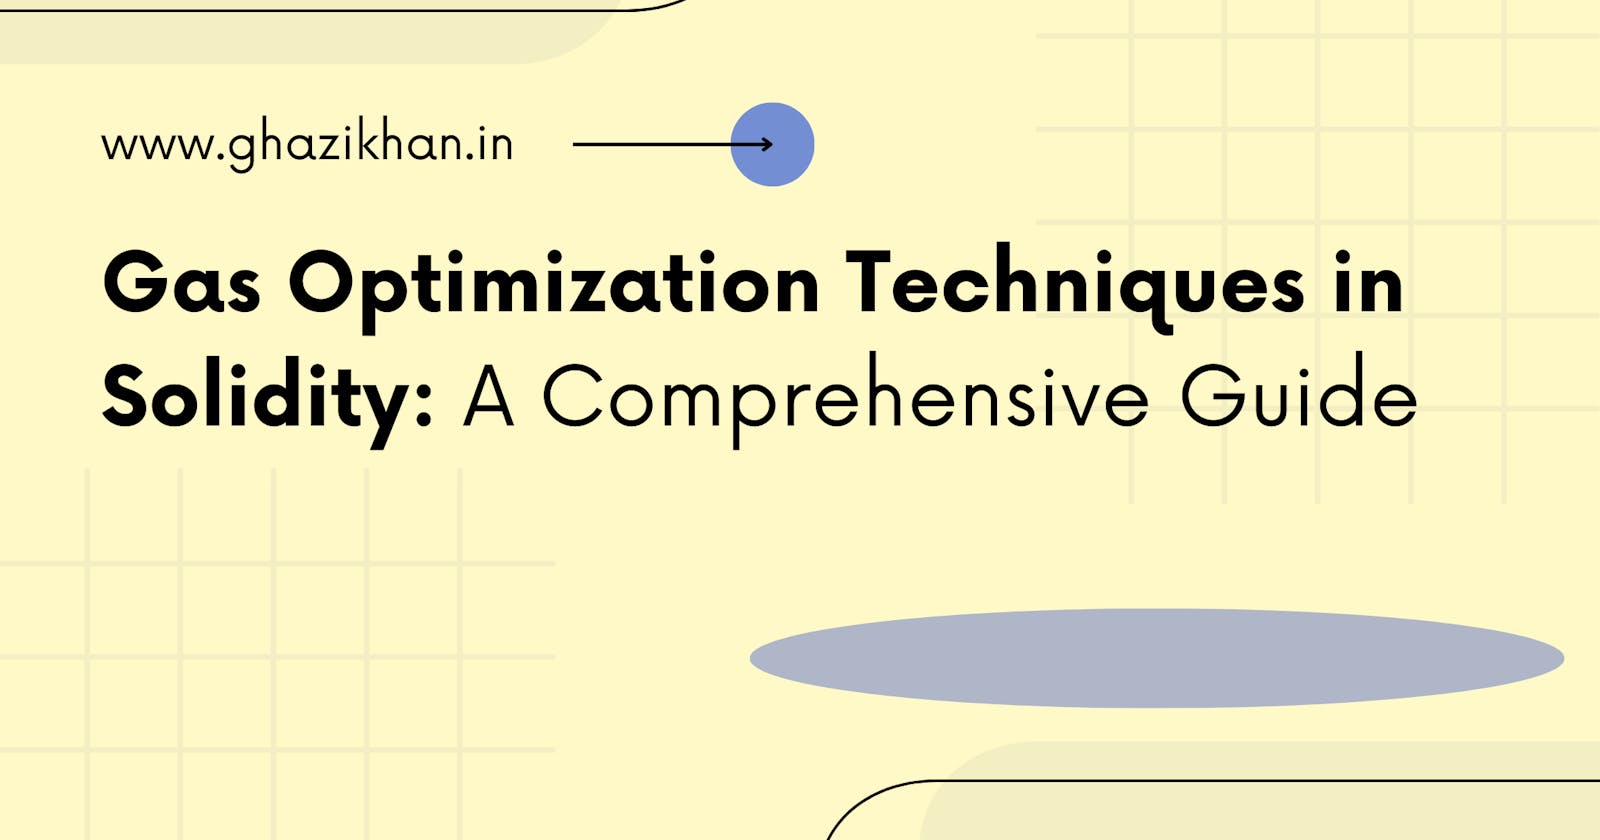 Gas Optimization Techniques in Solidity: A Comprehensive Guide